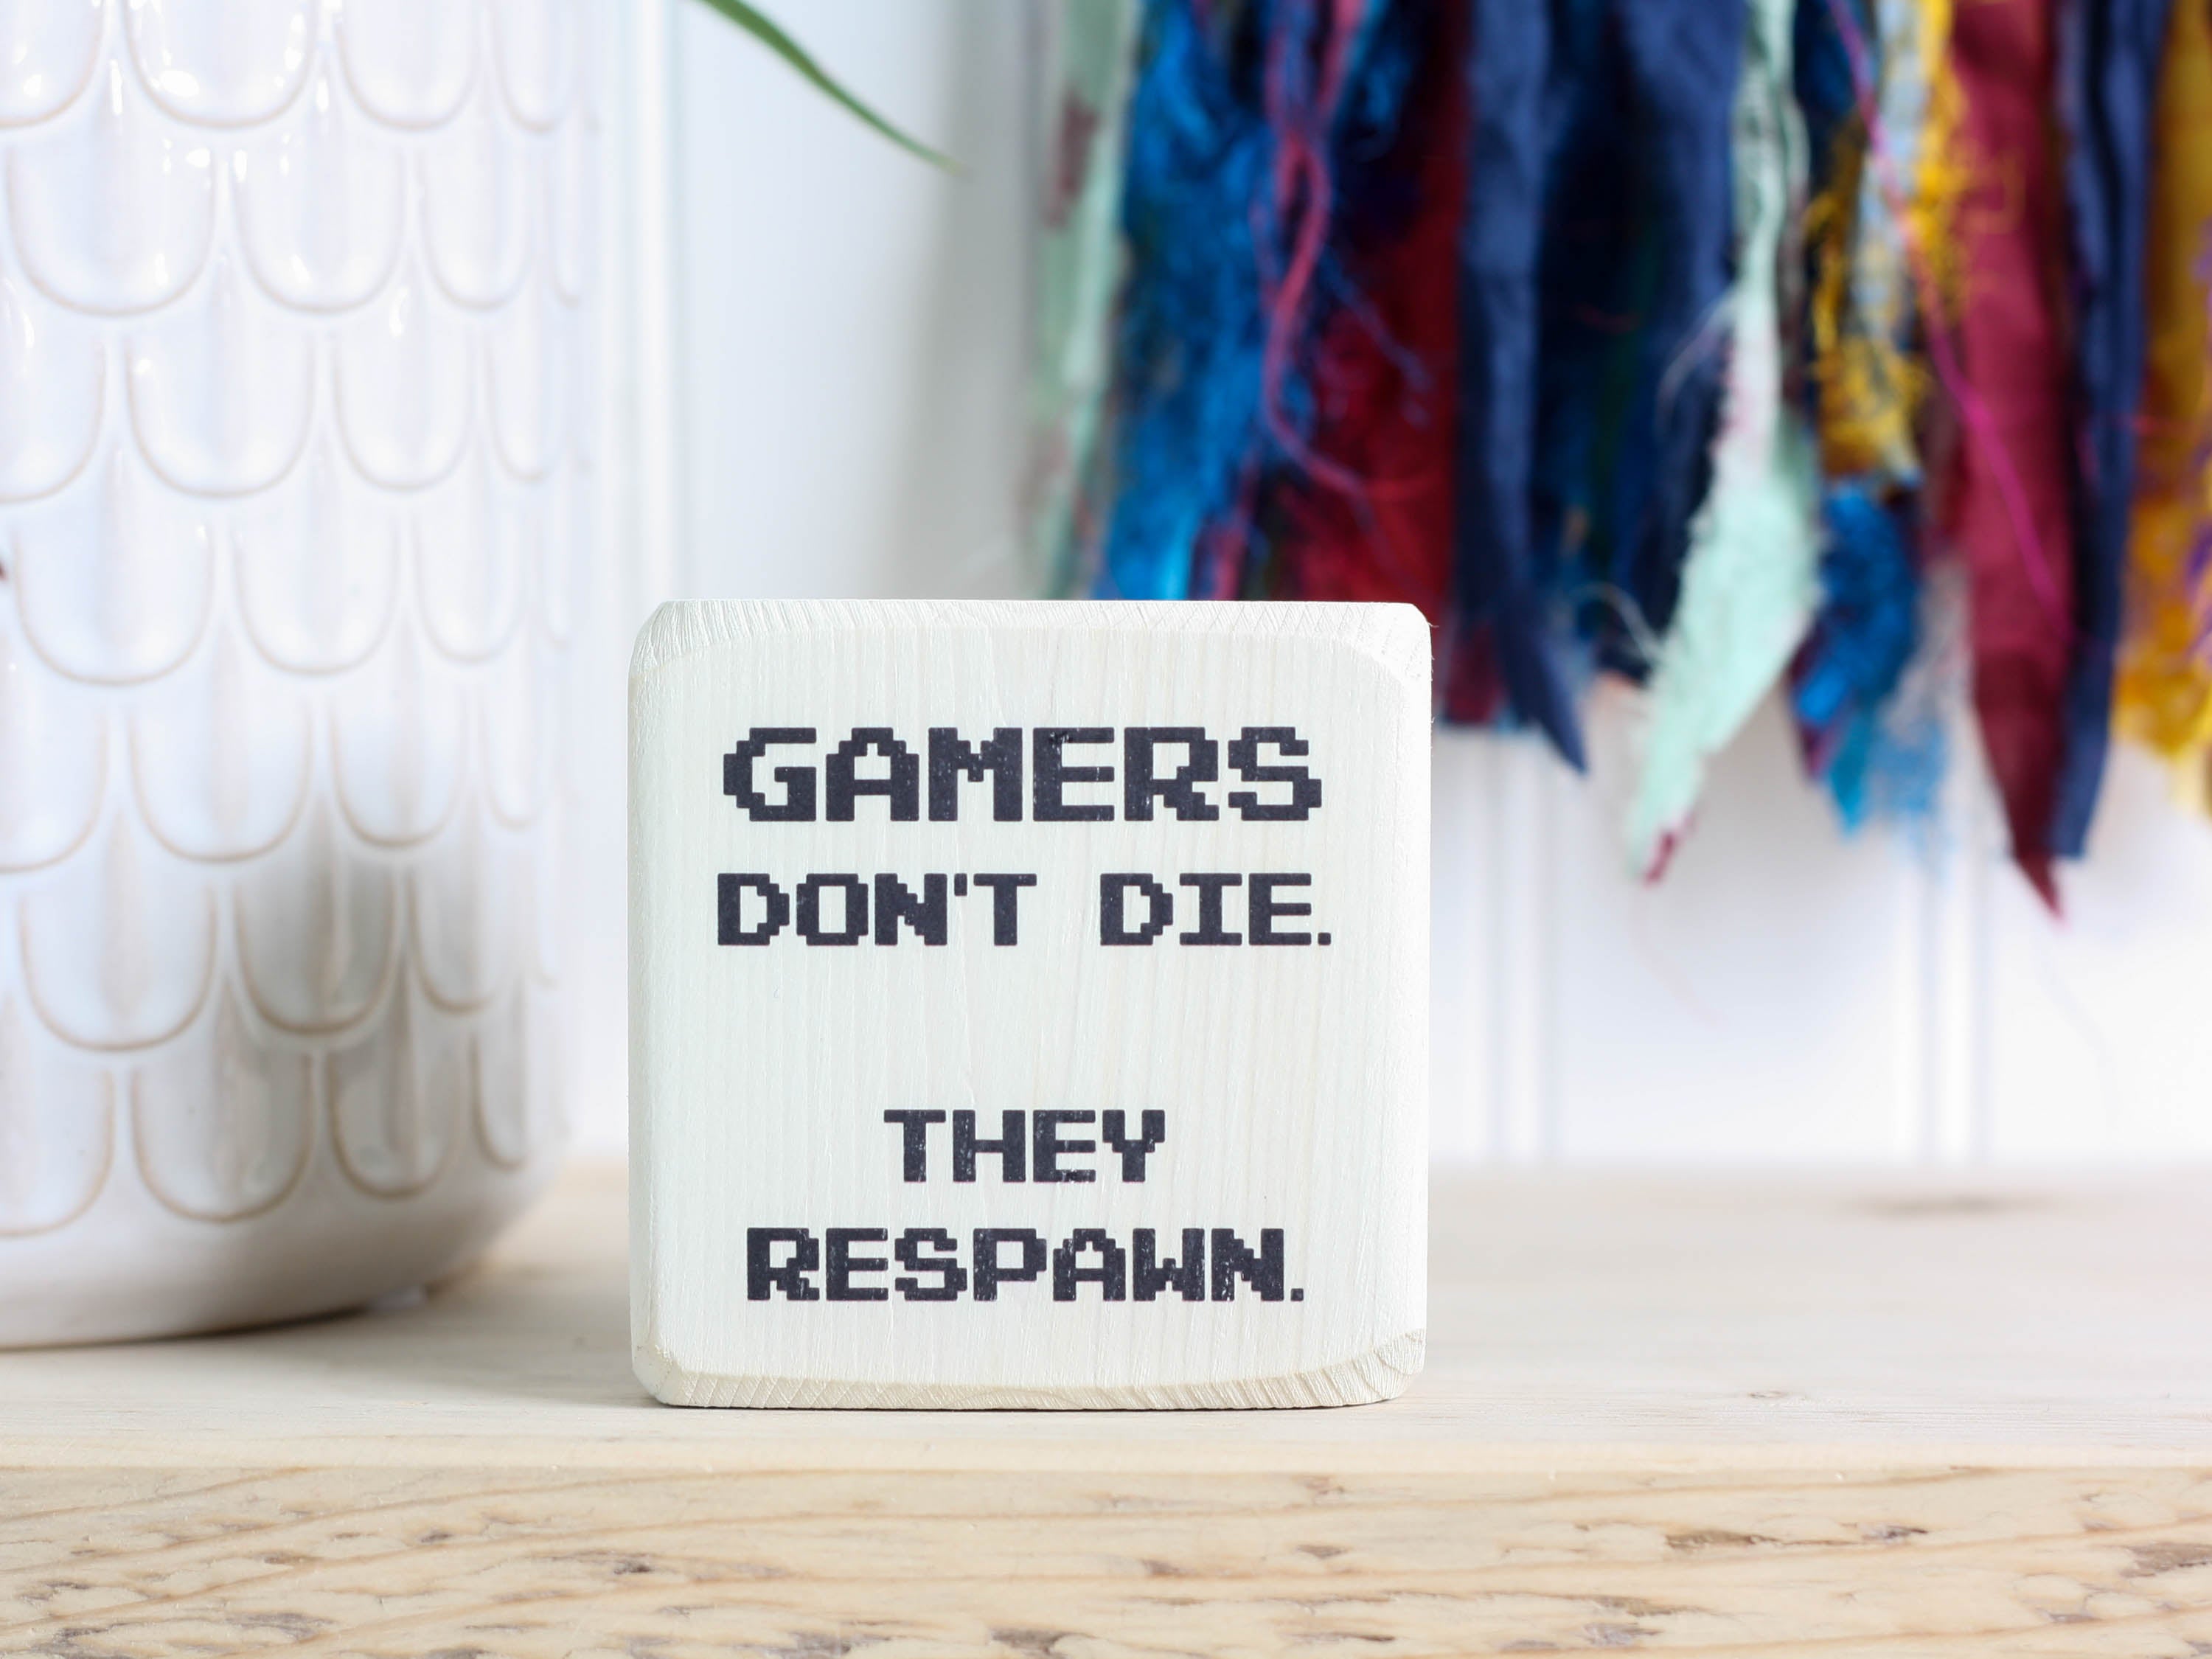 Small wood sign in whitewash with the saying "Gamers don't die. They respawn."